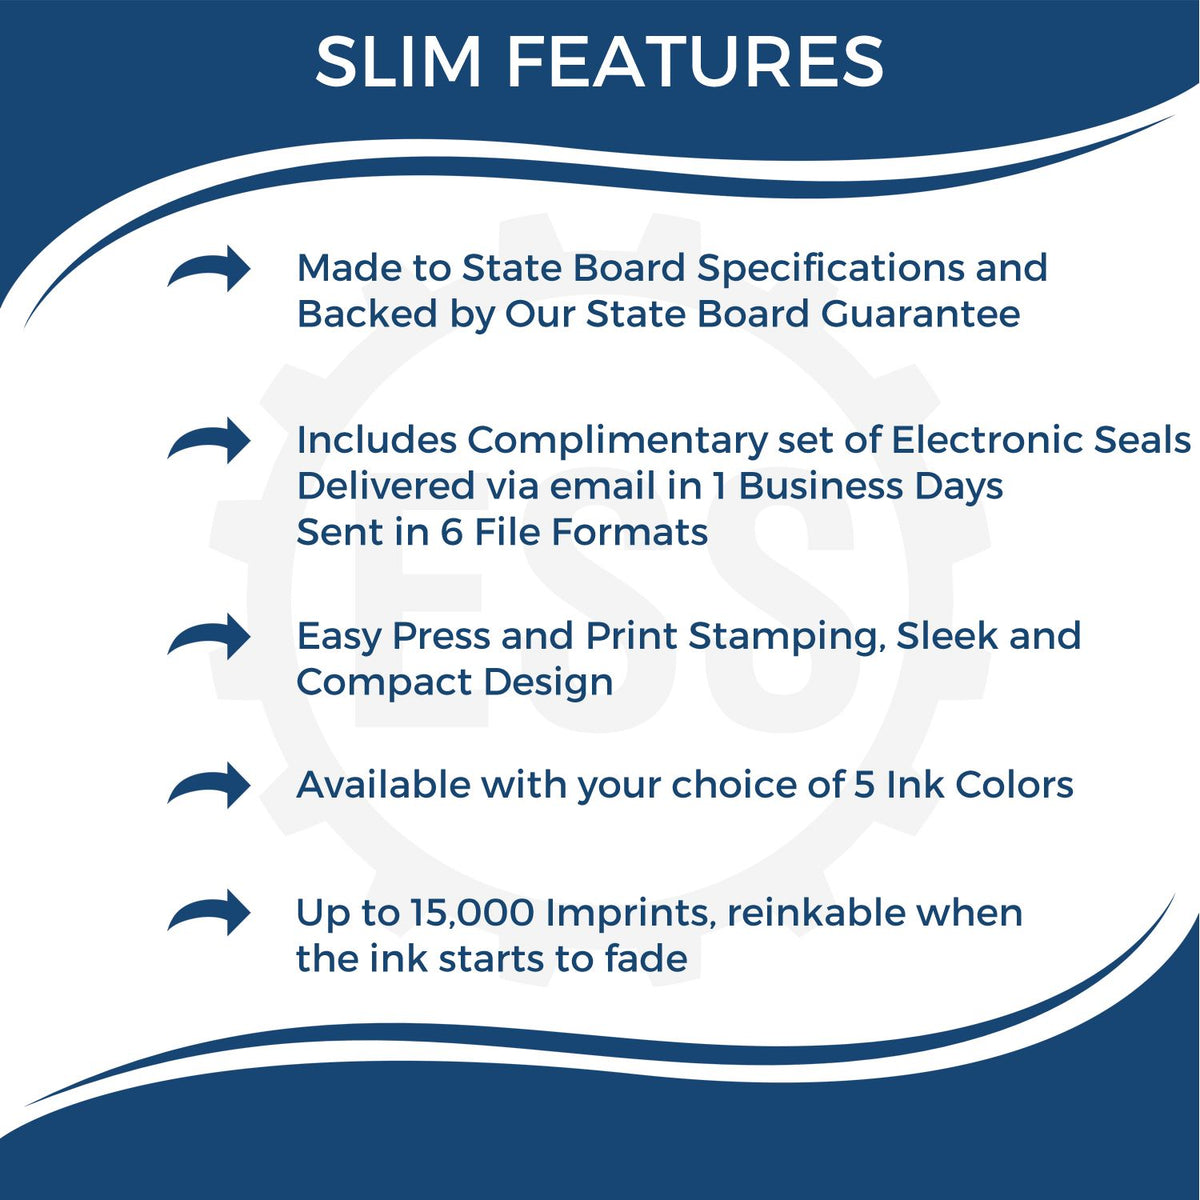 A picture of an infographic highlighting the selling points for the Slim Pre-Inked Indiana Land Surveyor Seal Stamp